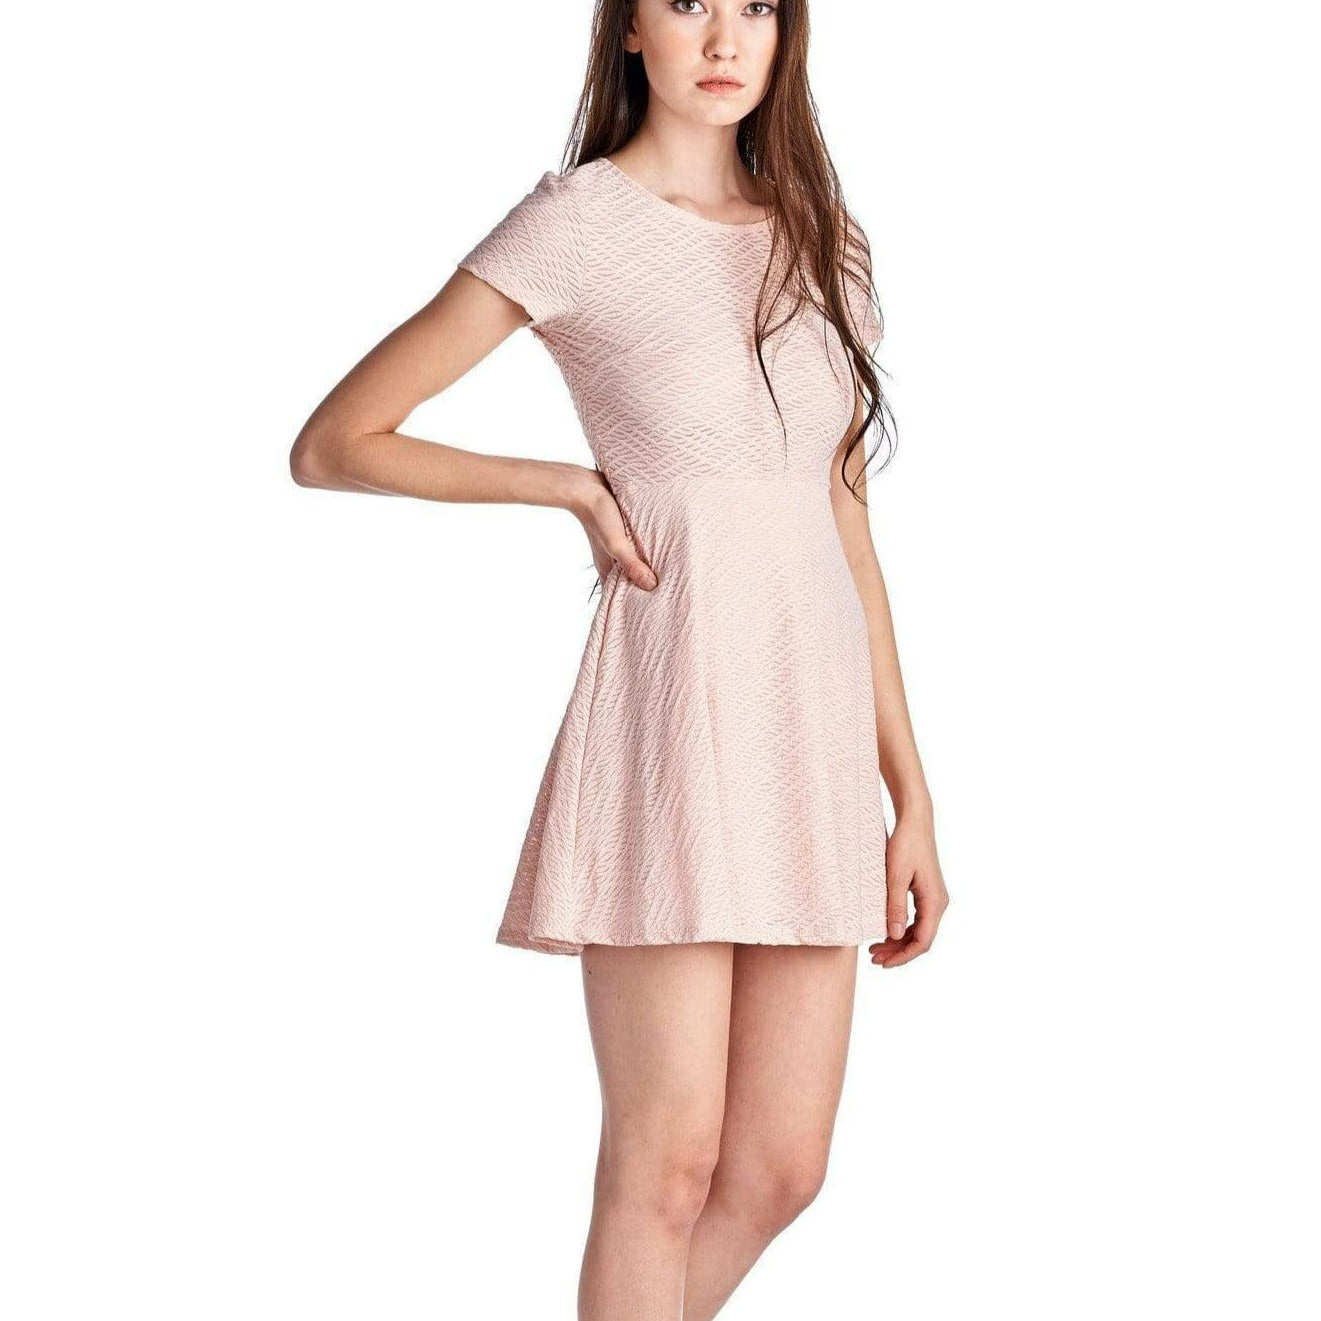 Ivory Felix Dresses Small / Pink 9 Baby Doll Textured Dress